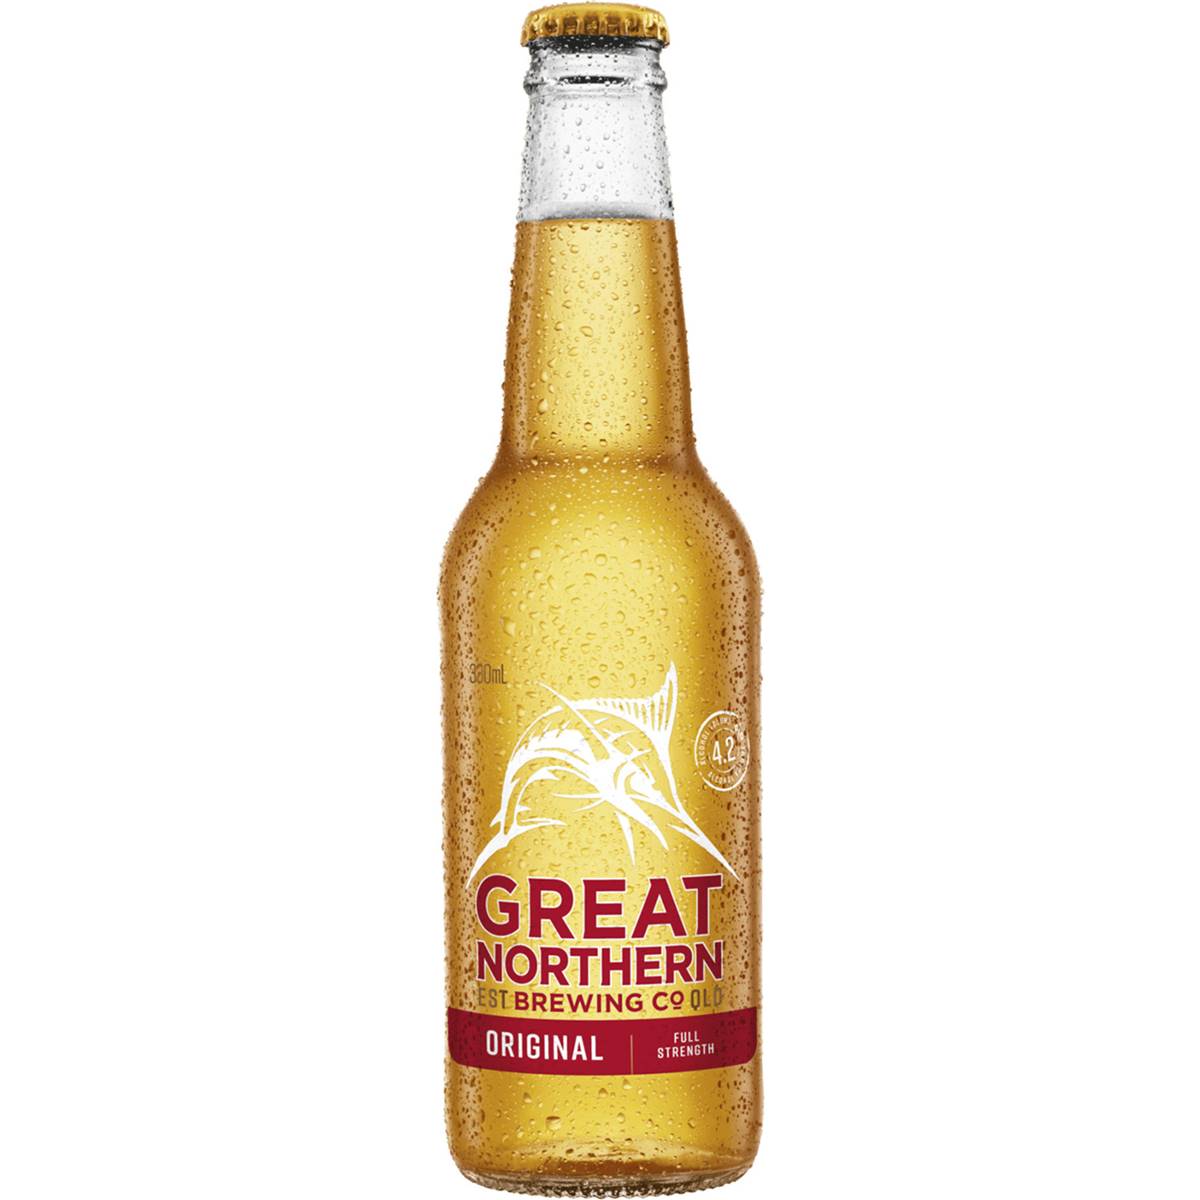 Calories in Great Northern Brewing Company Lager Original Bottle